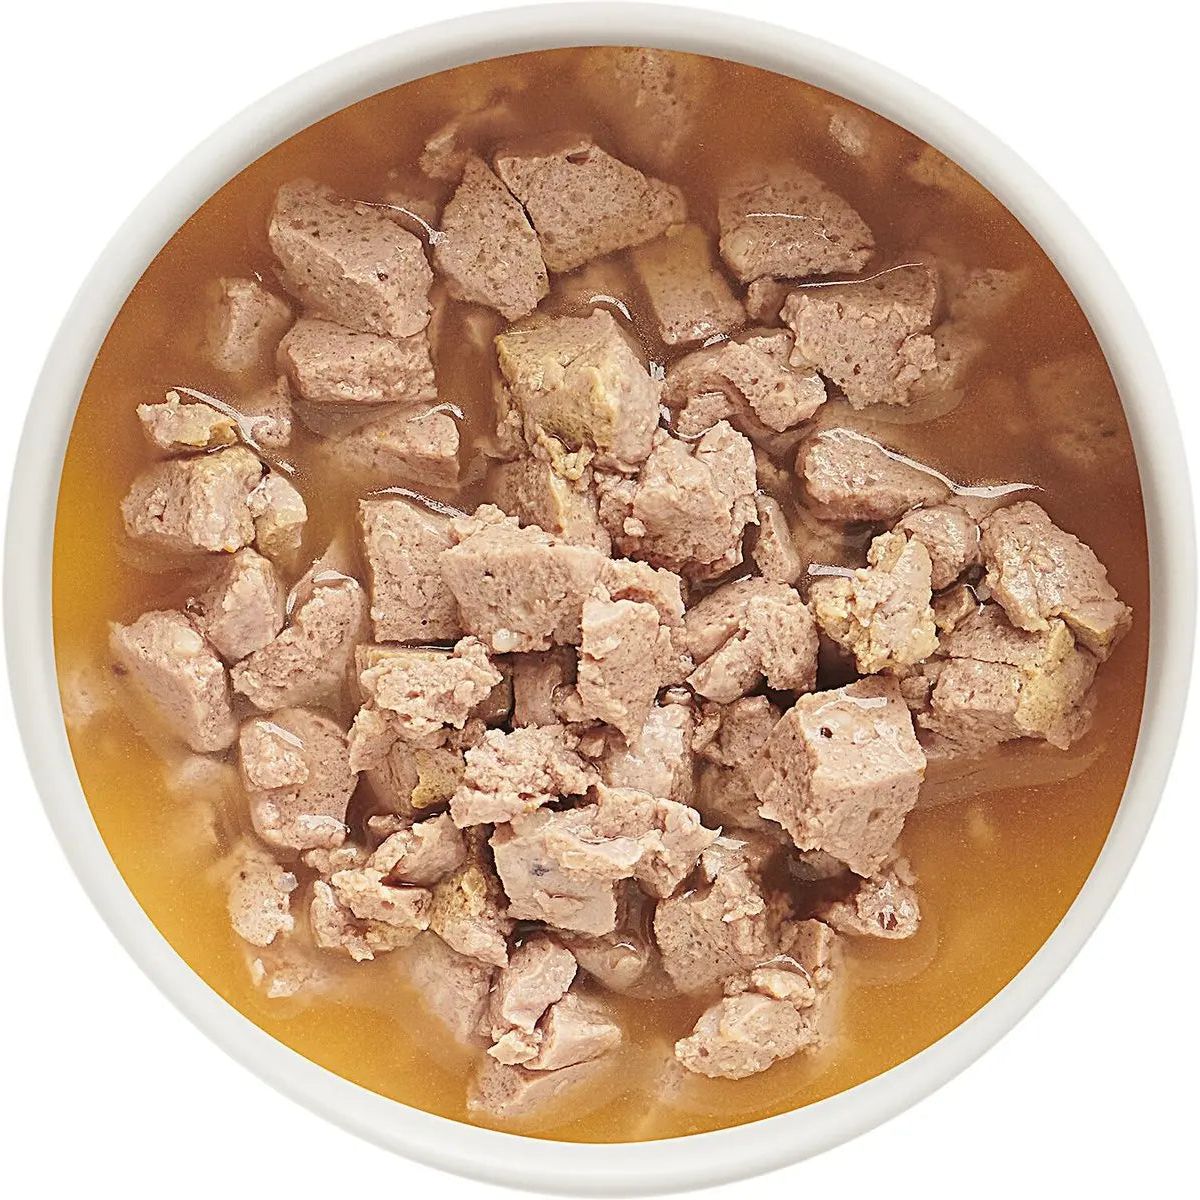 Made by Nacho Cuts In Gravy Recipes With Bone Broth Variety Pack Wet Cat Food 2-12 / 3 oz Made By Nacho